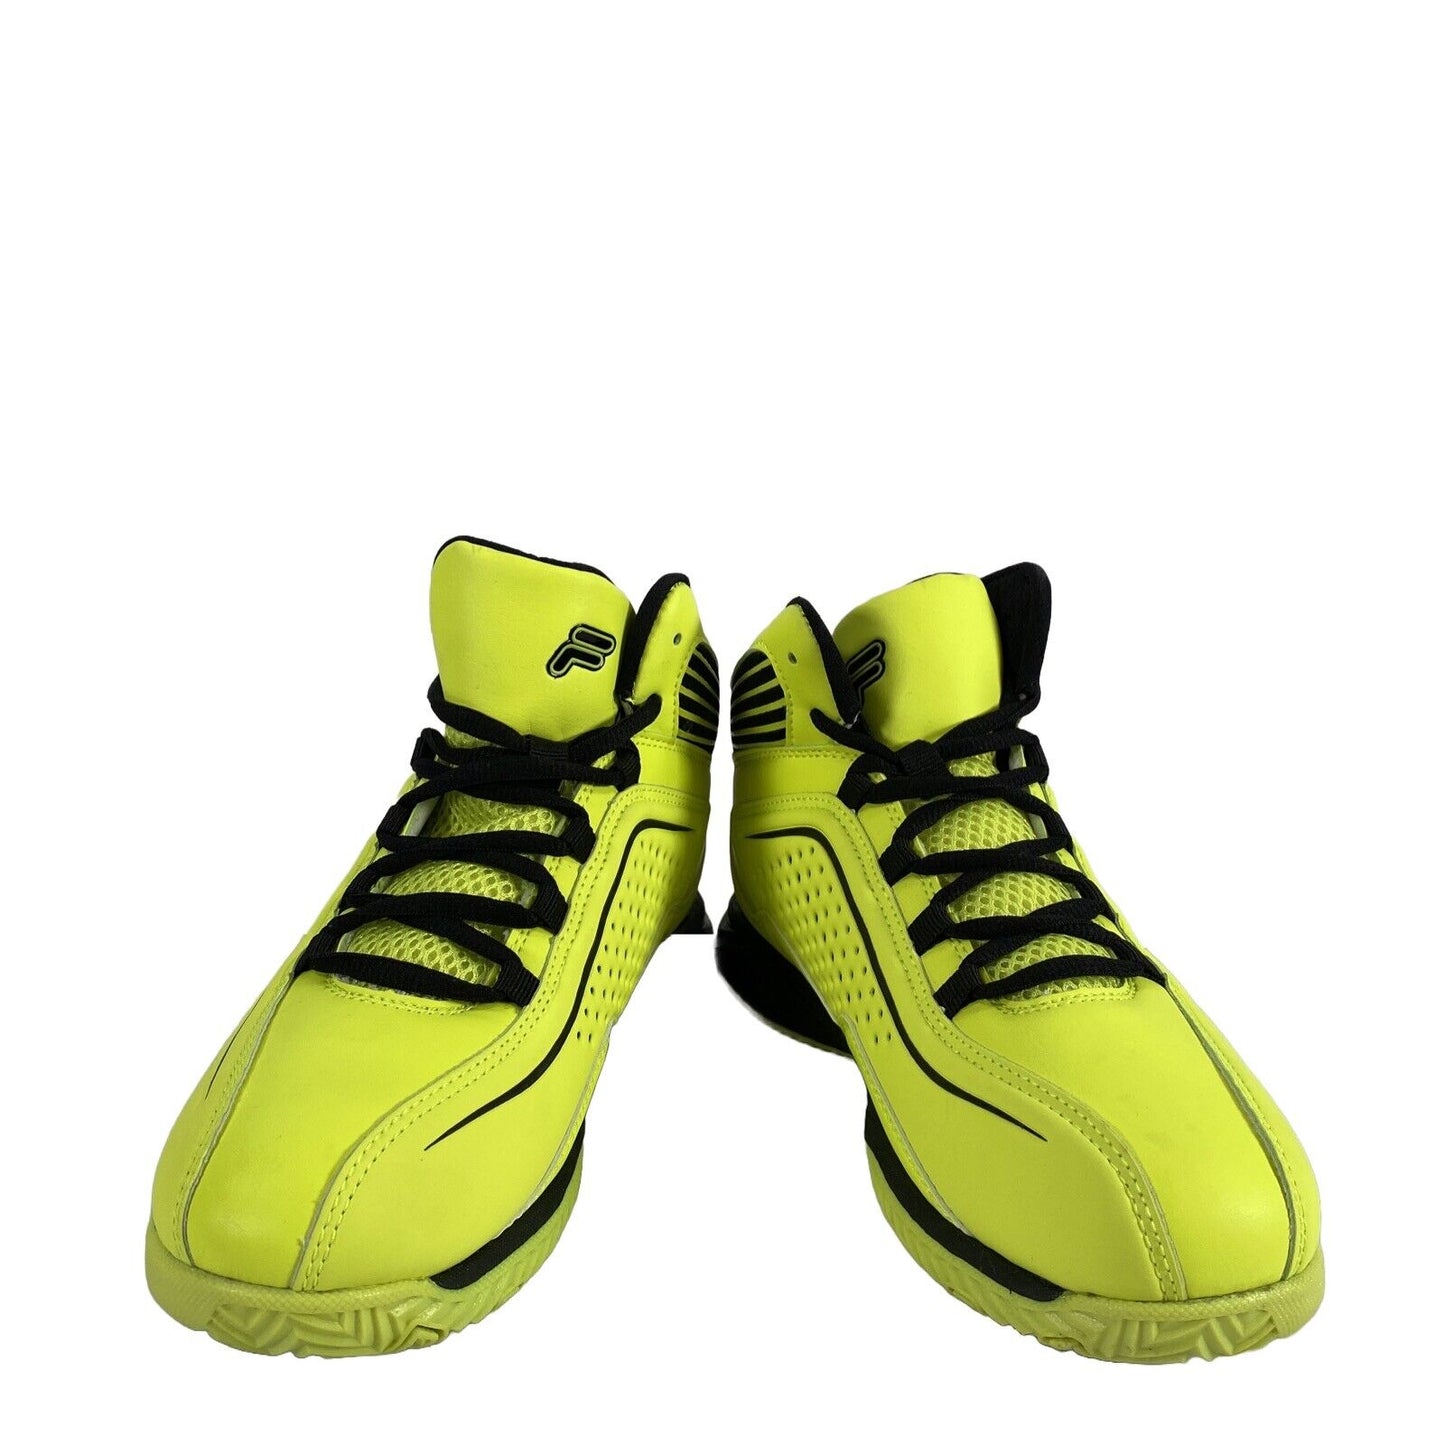 Fila Men's Neon Yellow/Green Lace Up Athletic Basketball Shoes - 5